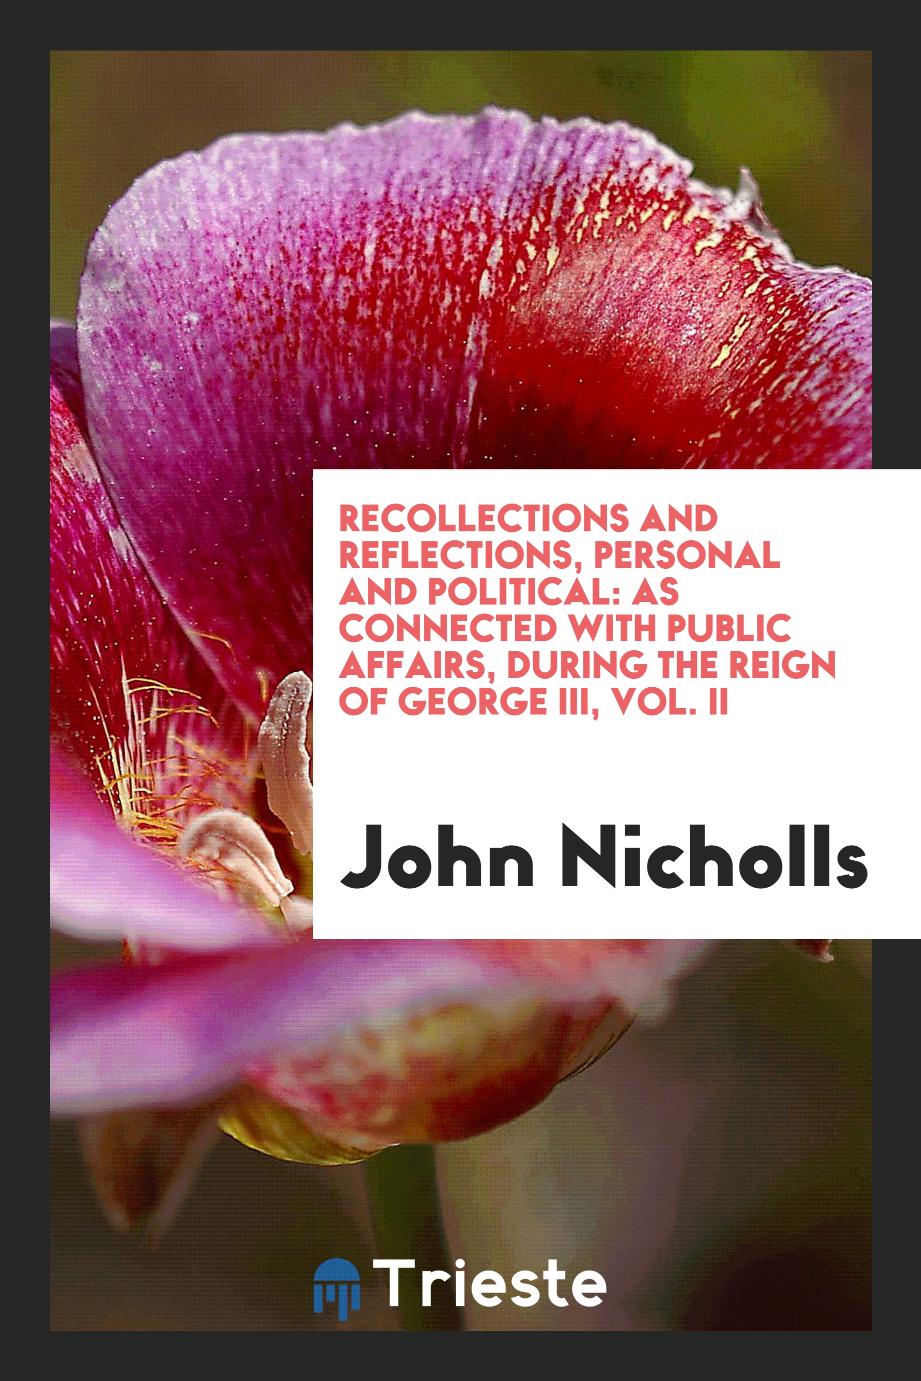 Recollections and reflections, personal and political: as connected with public affairs, during the reign of George III, Vol. II